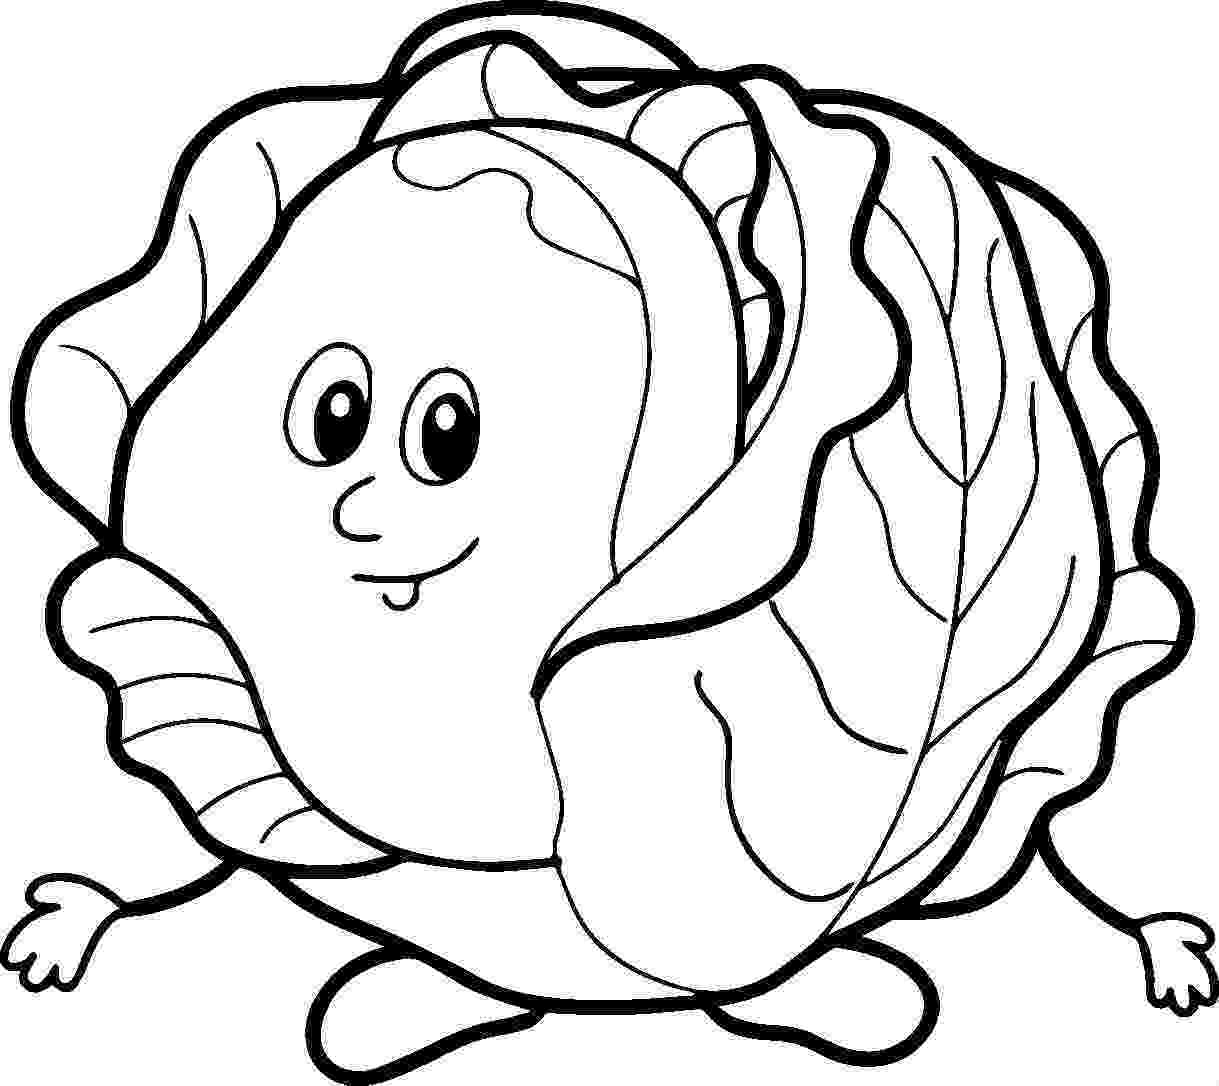 coloring pages for vegetables environment leaf fresh environment vegetable coloring vegetables for pages coloring 